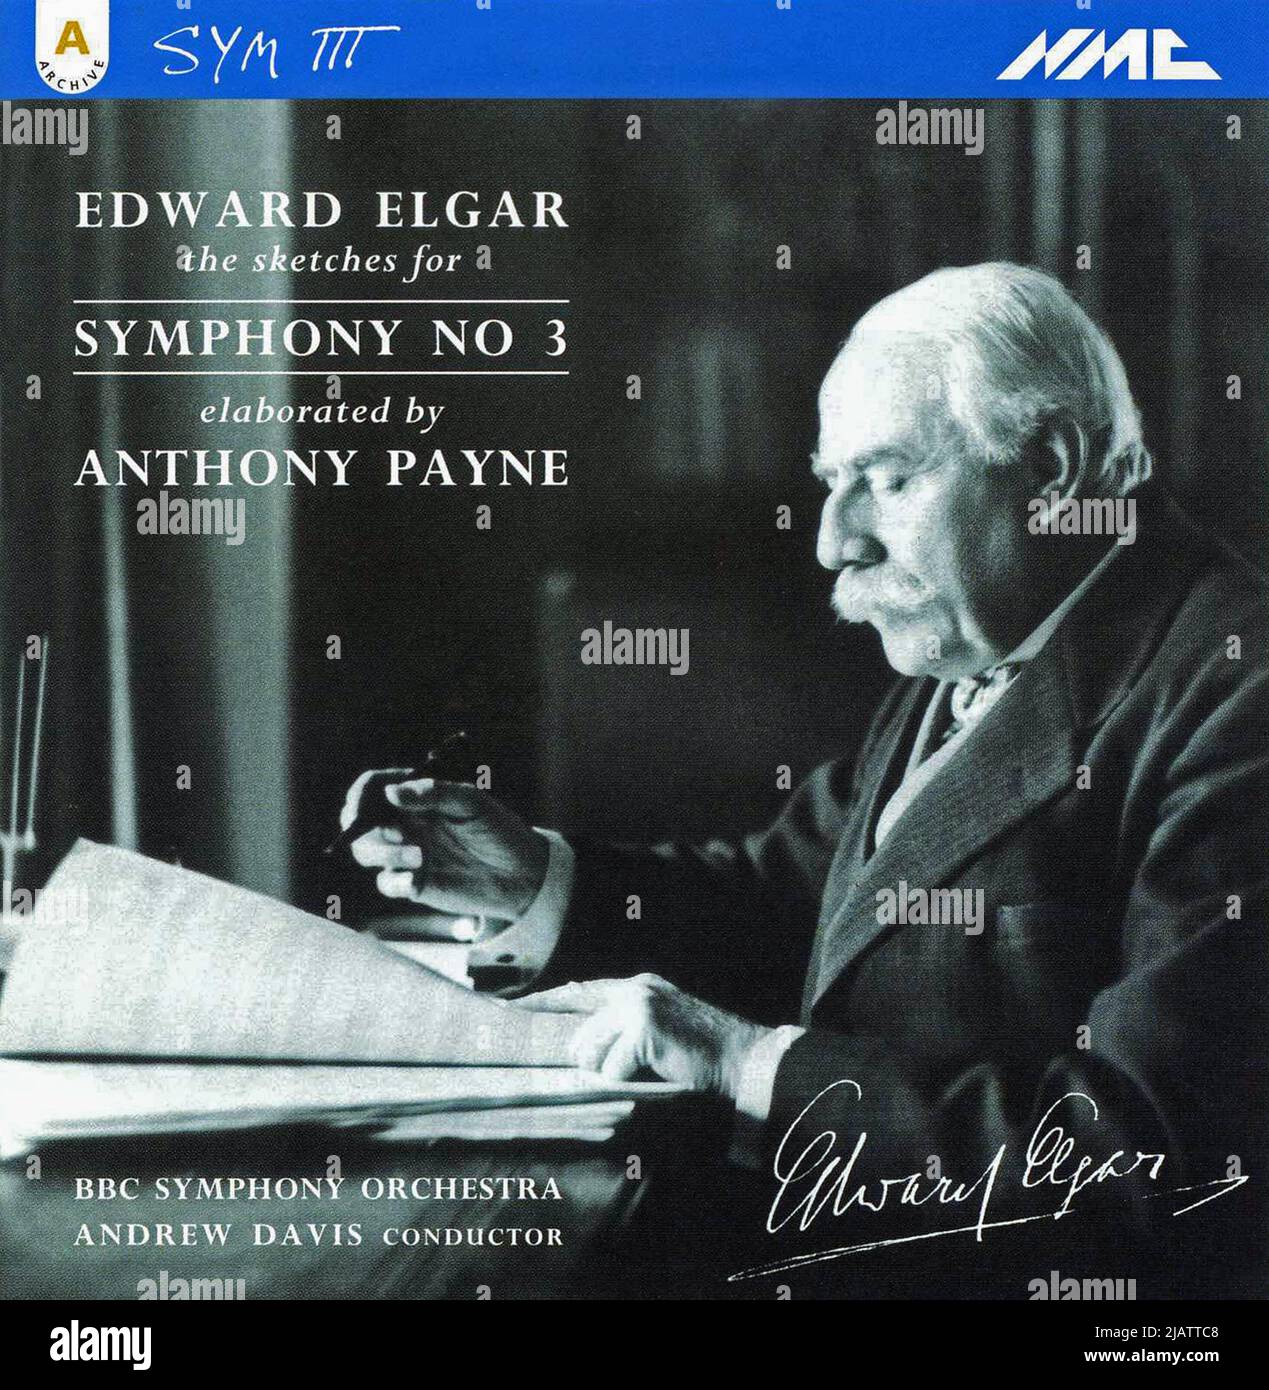 CD cover. 'Sketches for Symphony No.3' elaborated by Anthony Payne. Edward Elgar. BBC Symphony Orchestra. Andrew Davis. Stock Photo